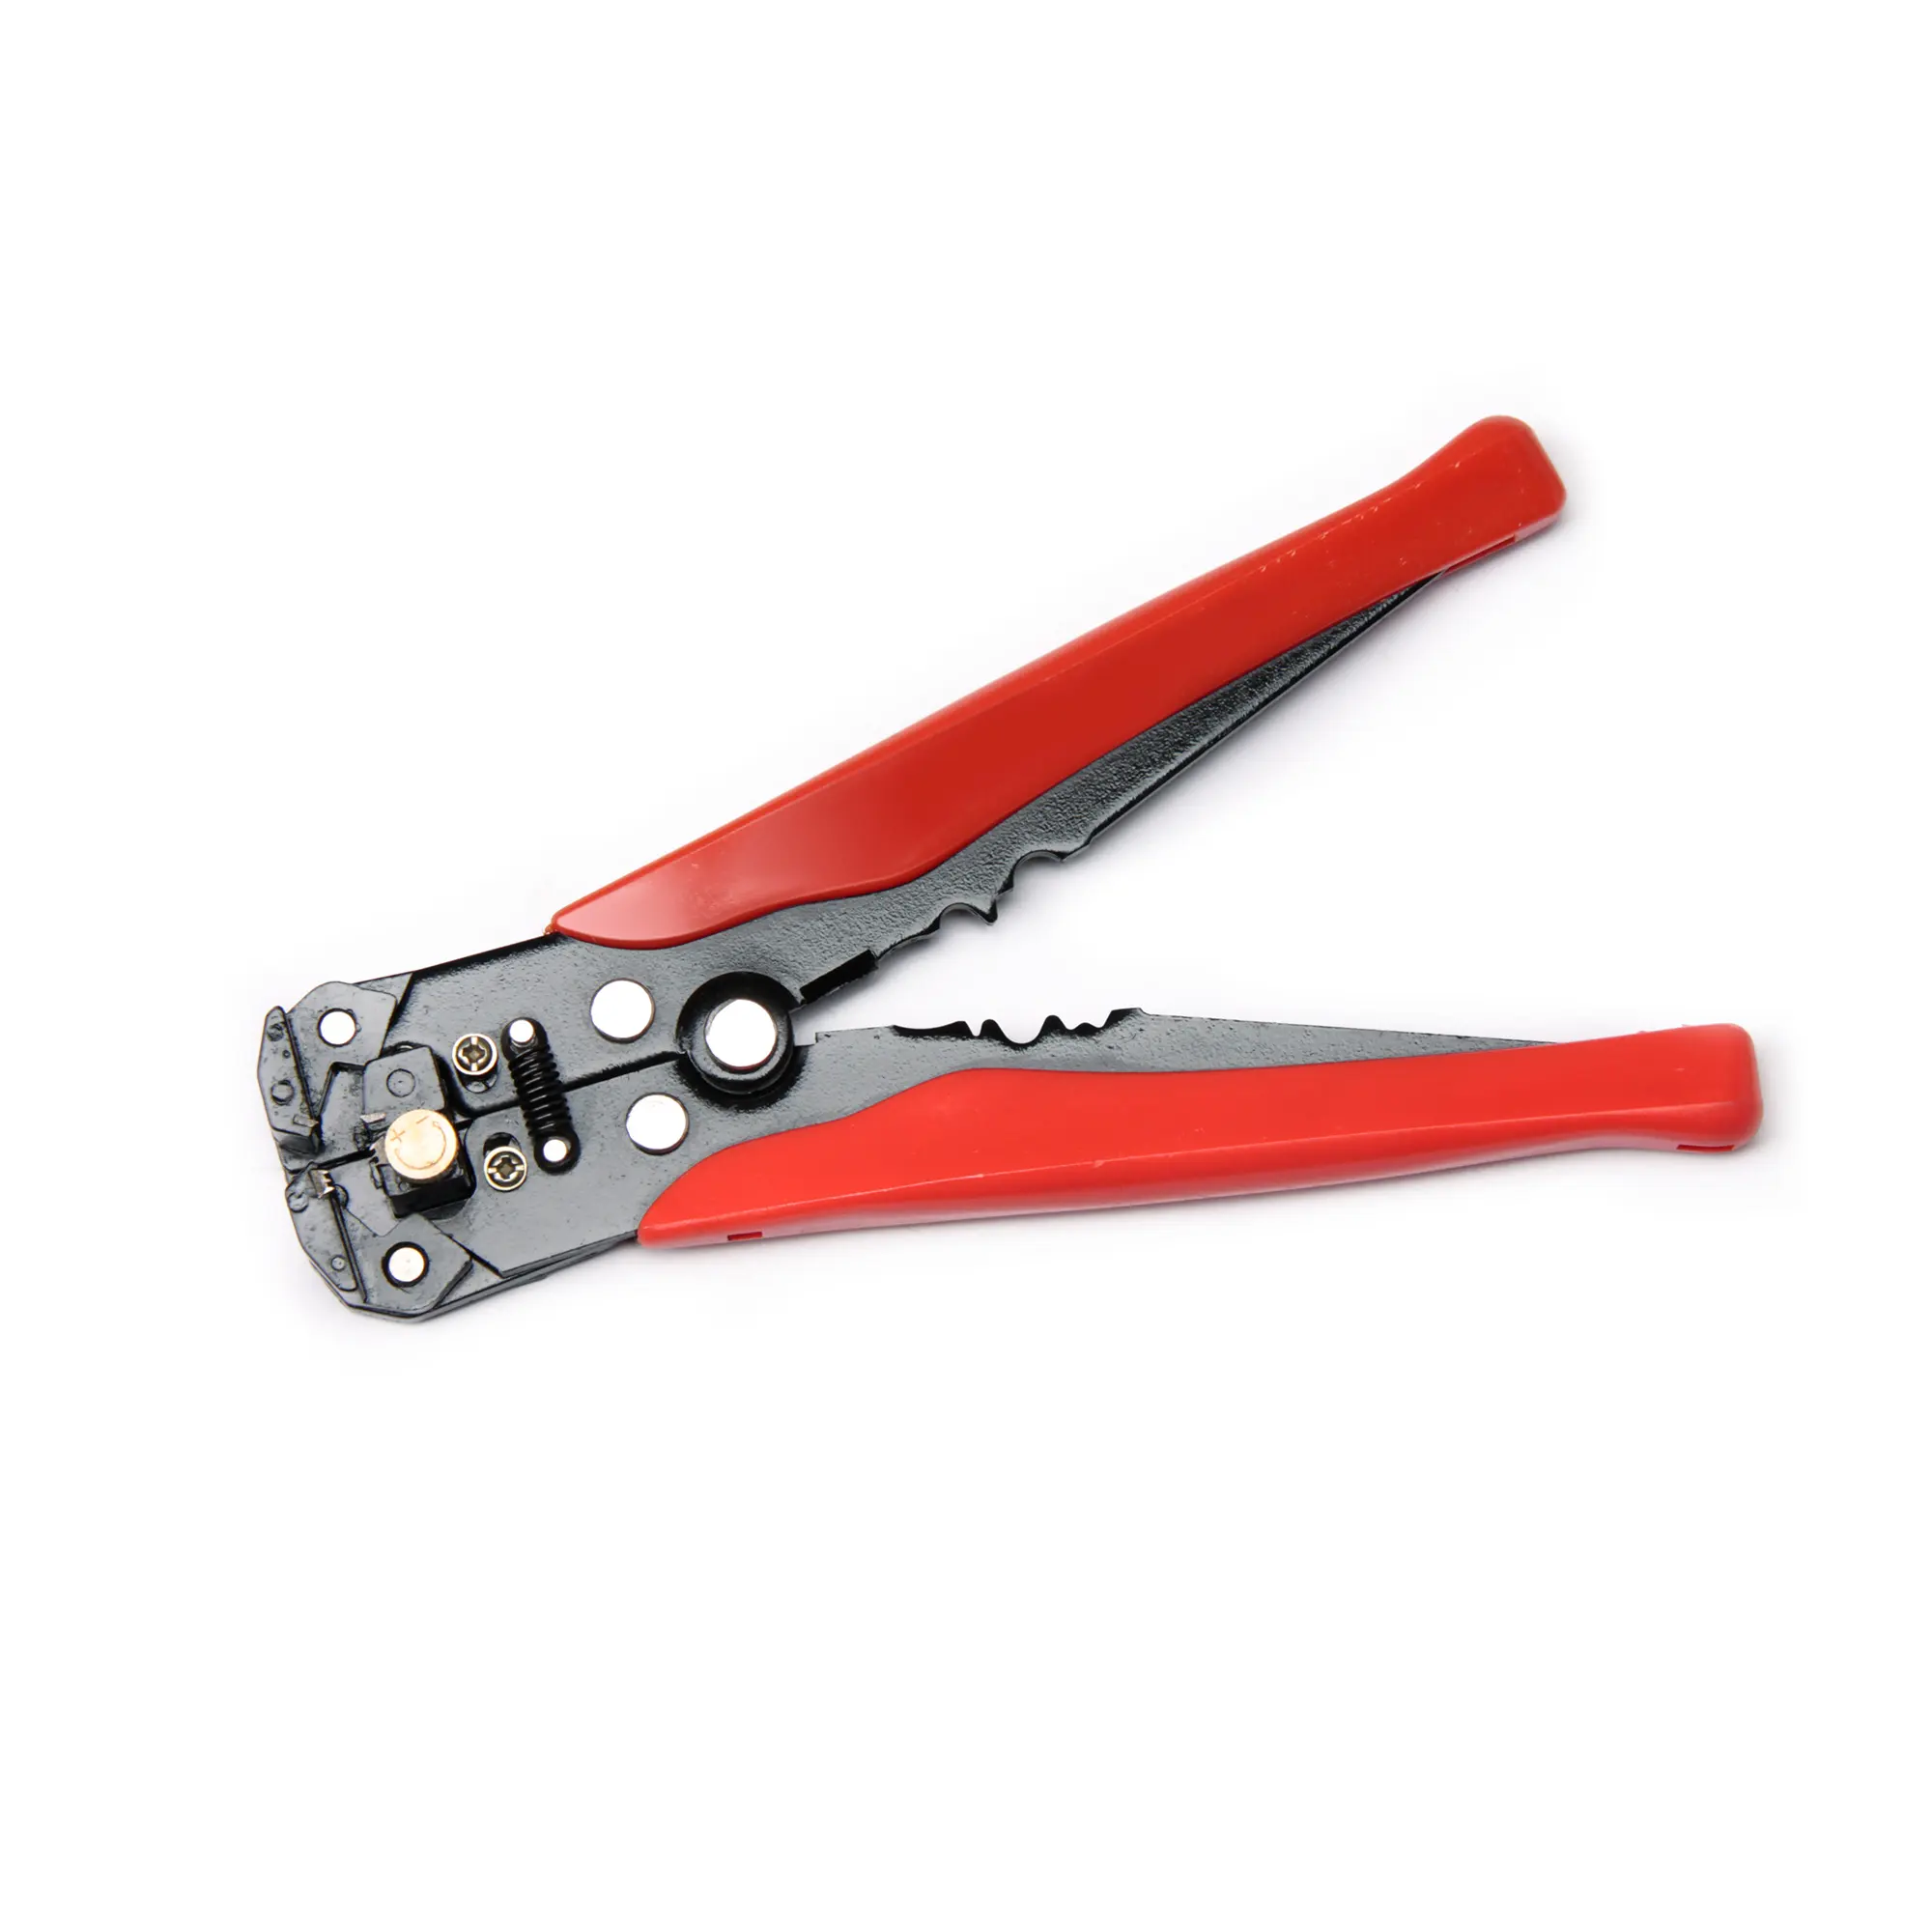 KAFUWELL PC4012R Cable Wire Stripper Cutter Crimper Automatic Multifunctional Crimper Stripper Plier Hand Tools